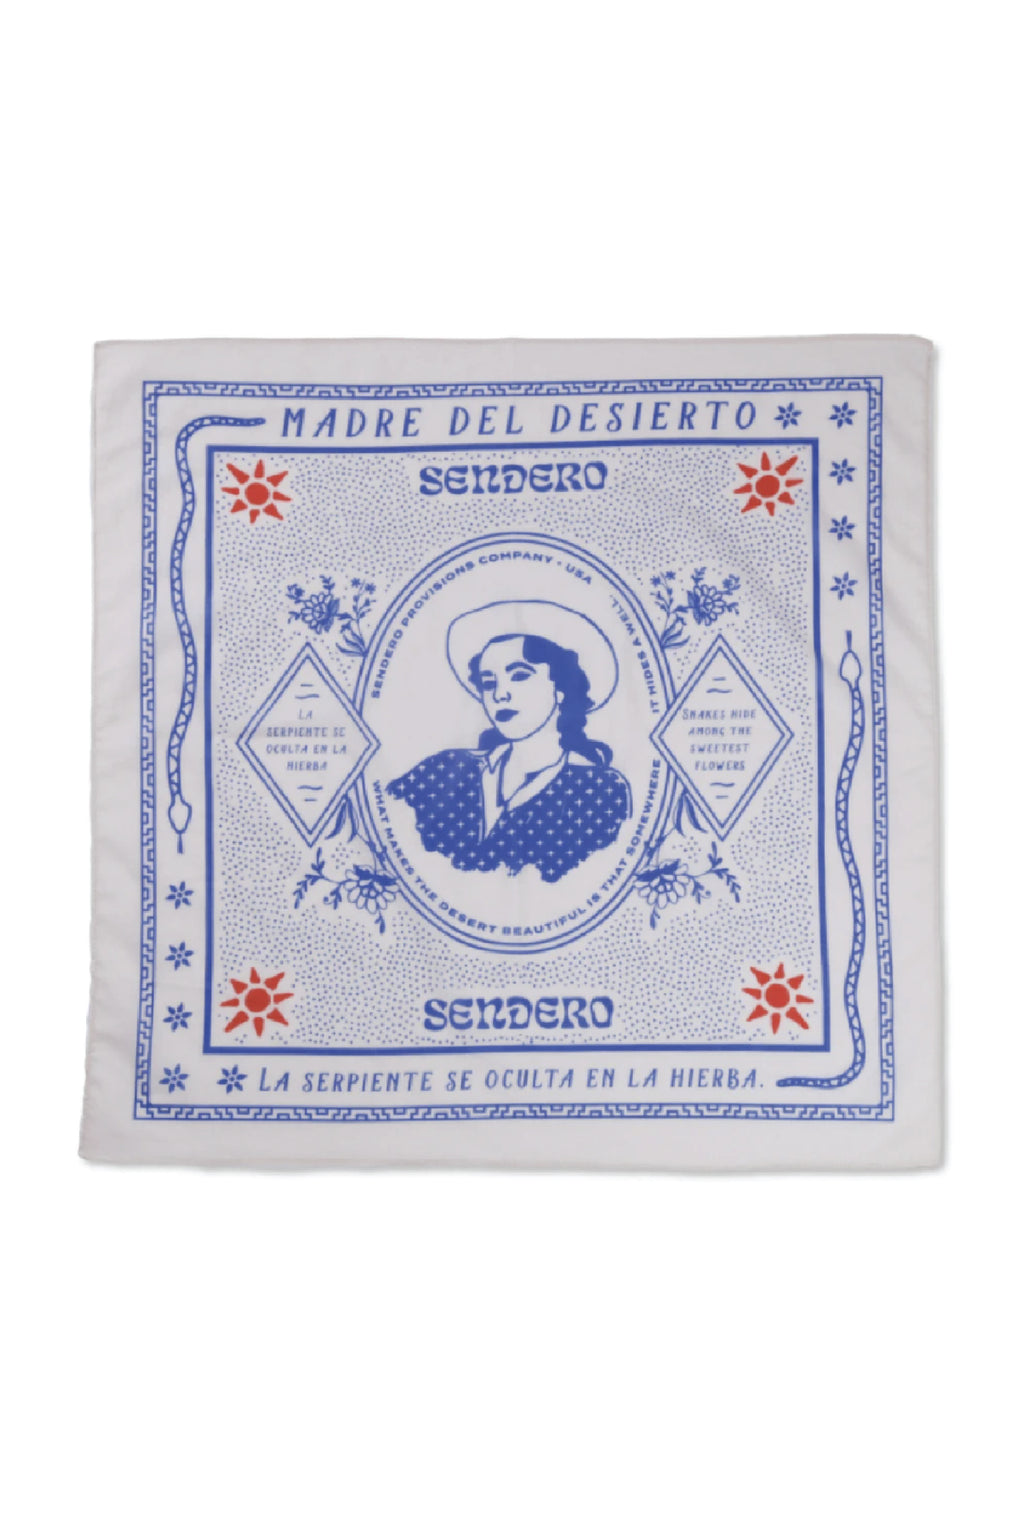 sendero madre del desierto bandana by Ramble & Company || shop now at rambleandcompany.com or visit our storefront in downtown Wichita Falls, Texas || soft inspirational graphic t-shirts